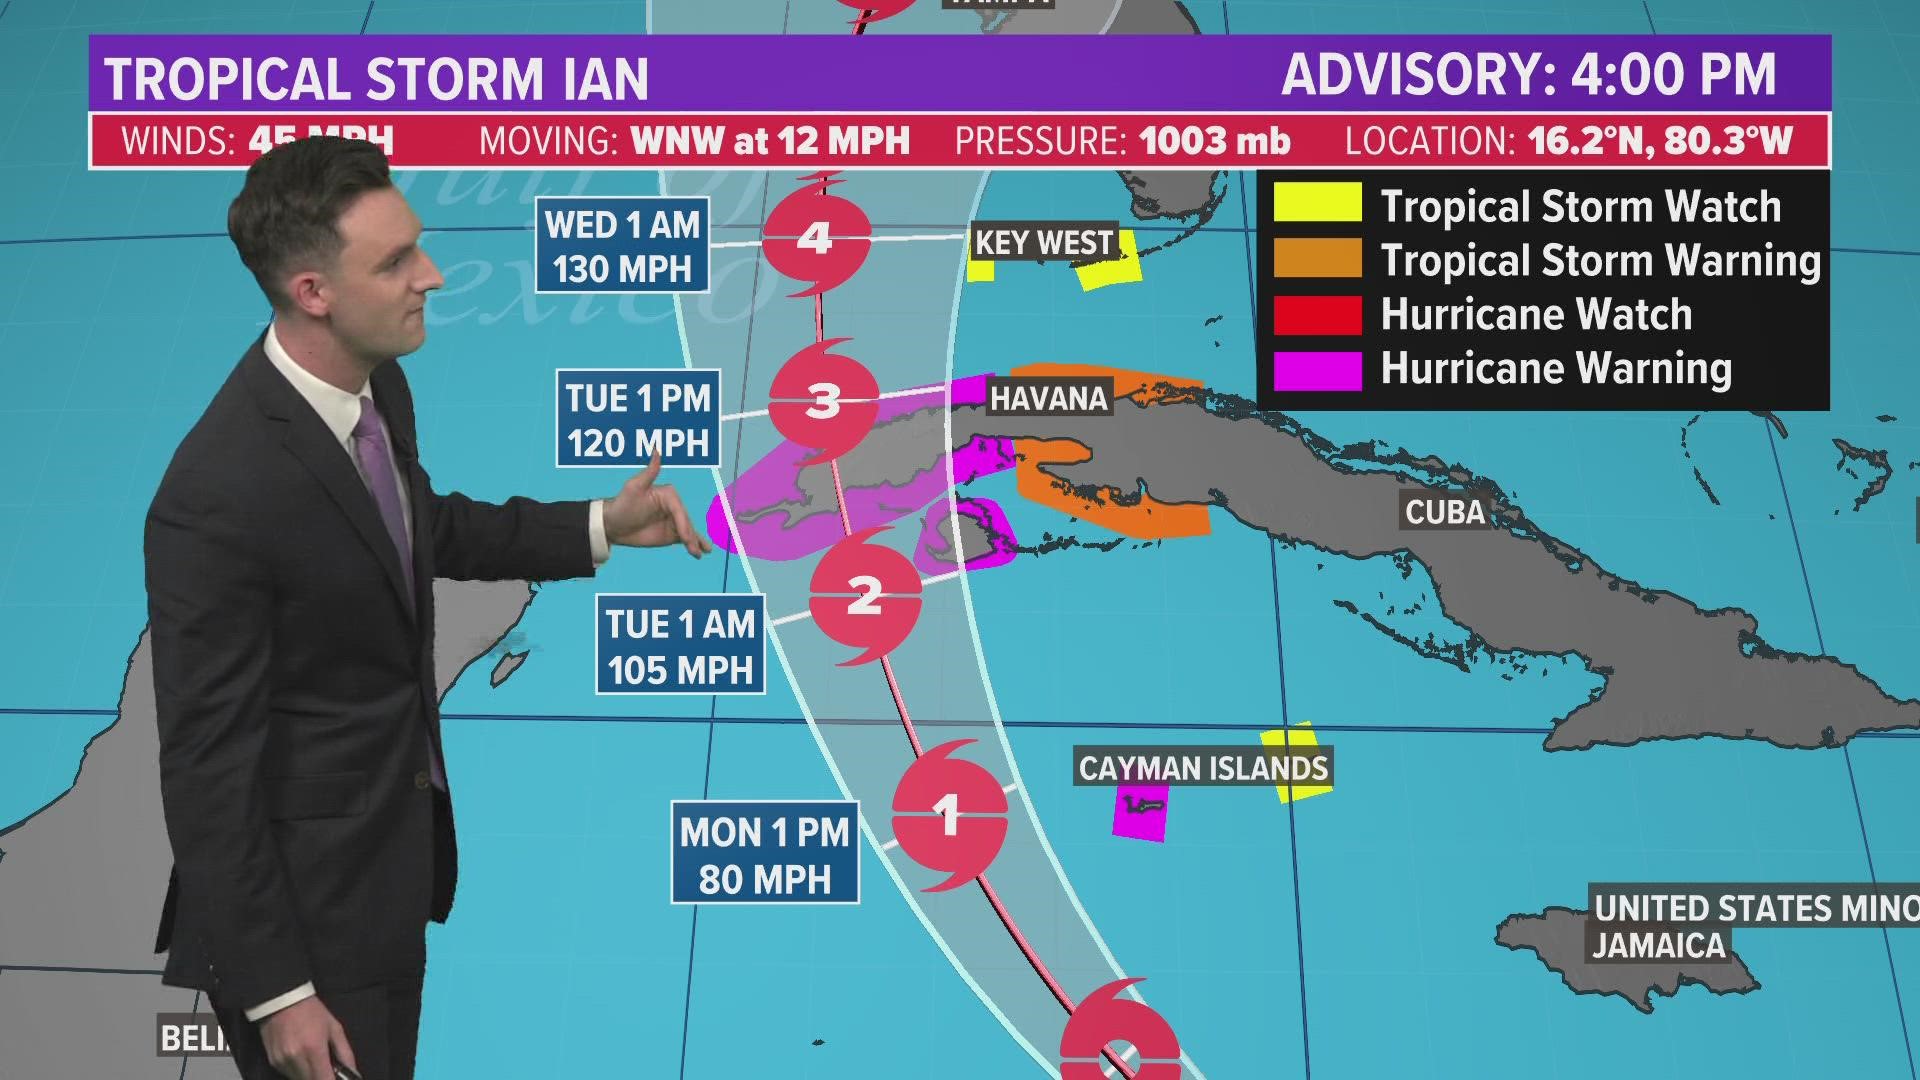 The state is under a state of emergency ahead of Tropical Storm Ian's landfall later this week.